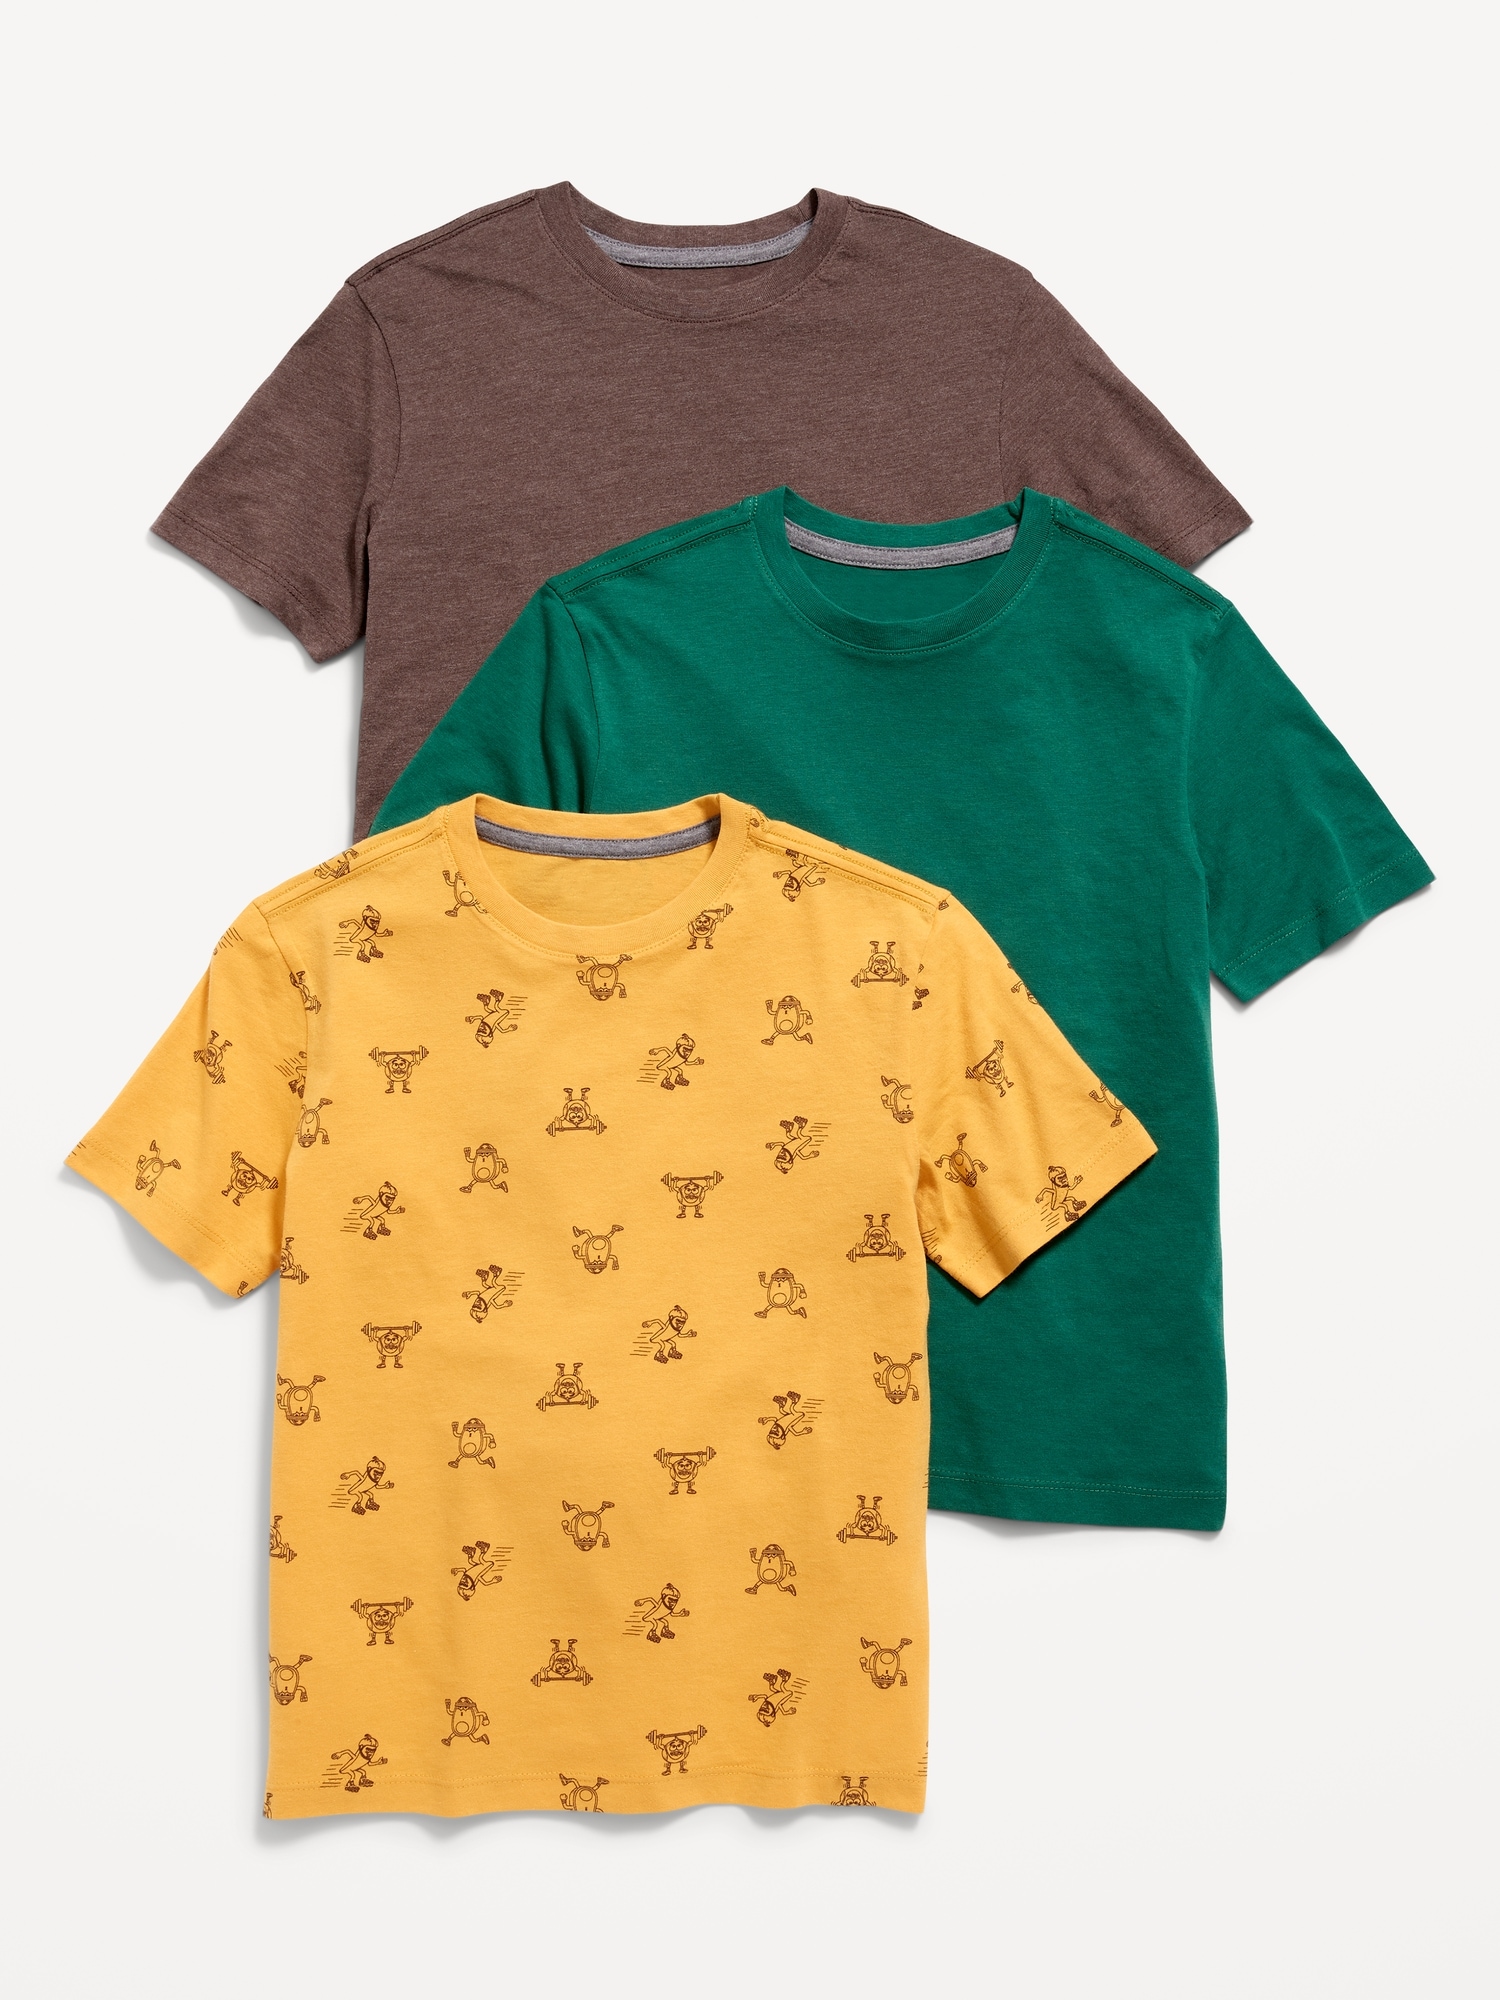 Old Navy Softest Crew-Neck T-Shirt 3-Pack for Boys green. 1